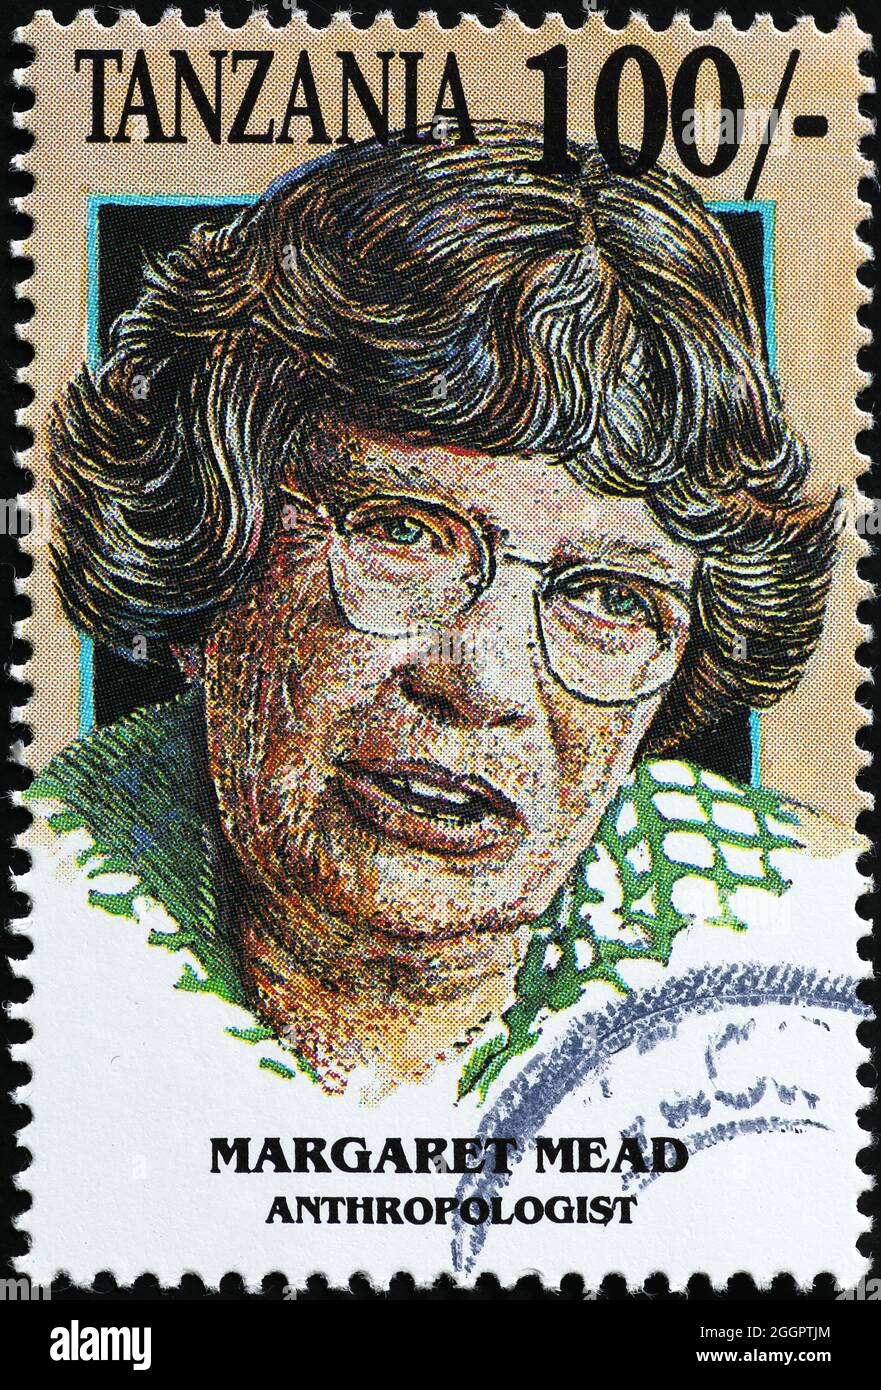 Anthropologist Margaret Mead on postage stamp Stock Photo